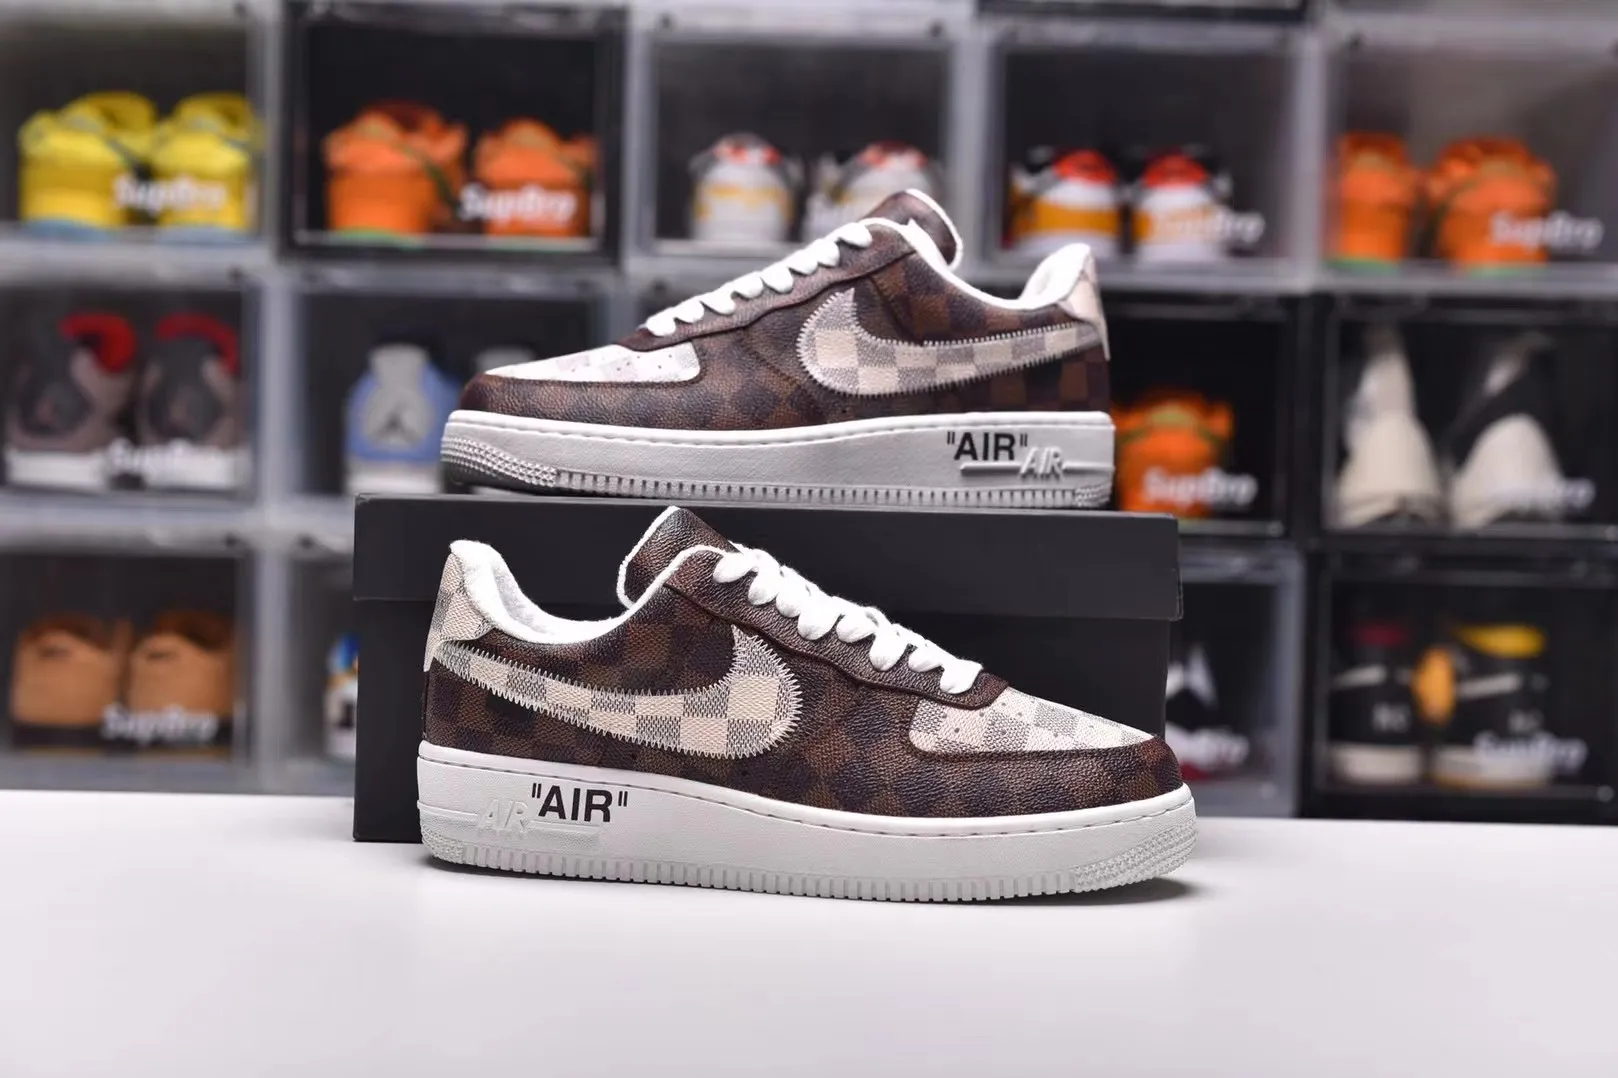 YASSW | How Air Force 1 Sneakers Add Height and Boost Confidence